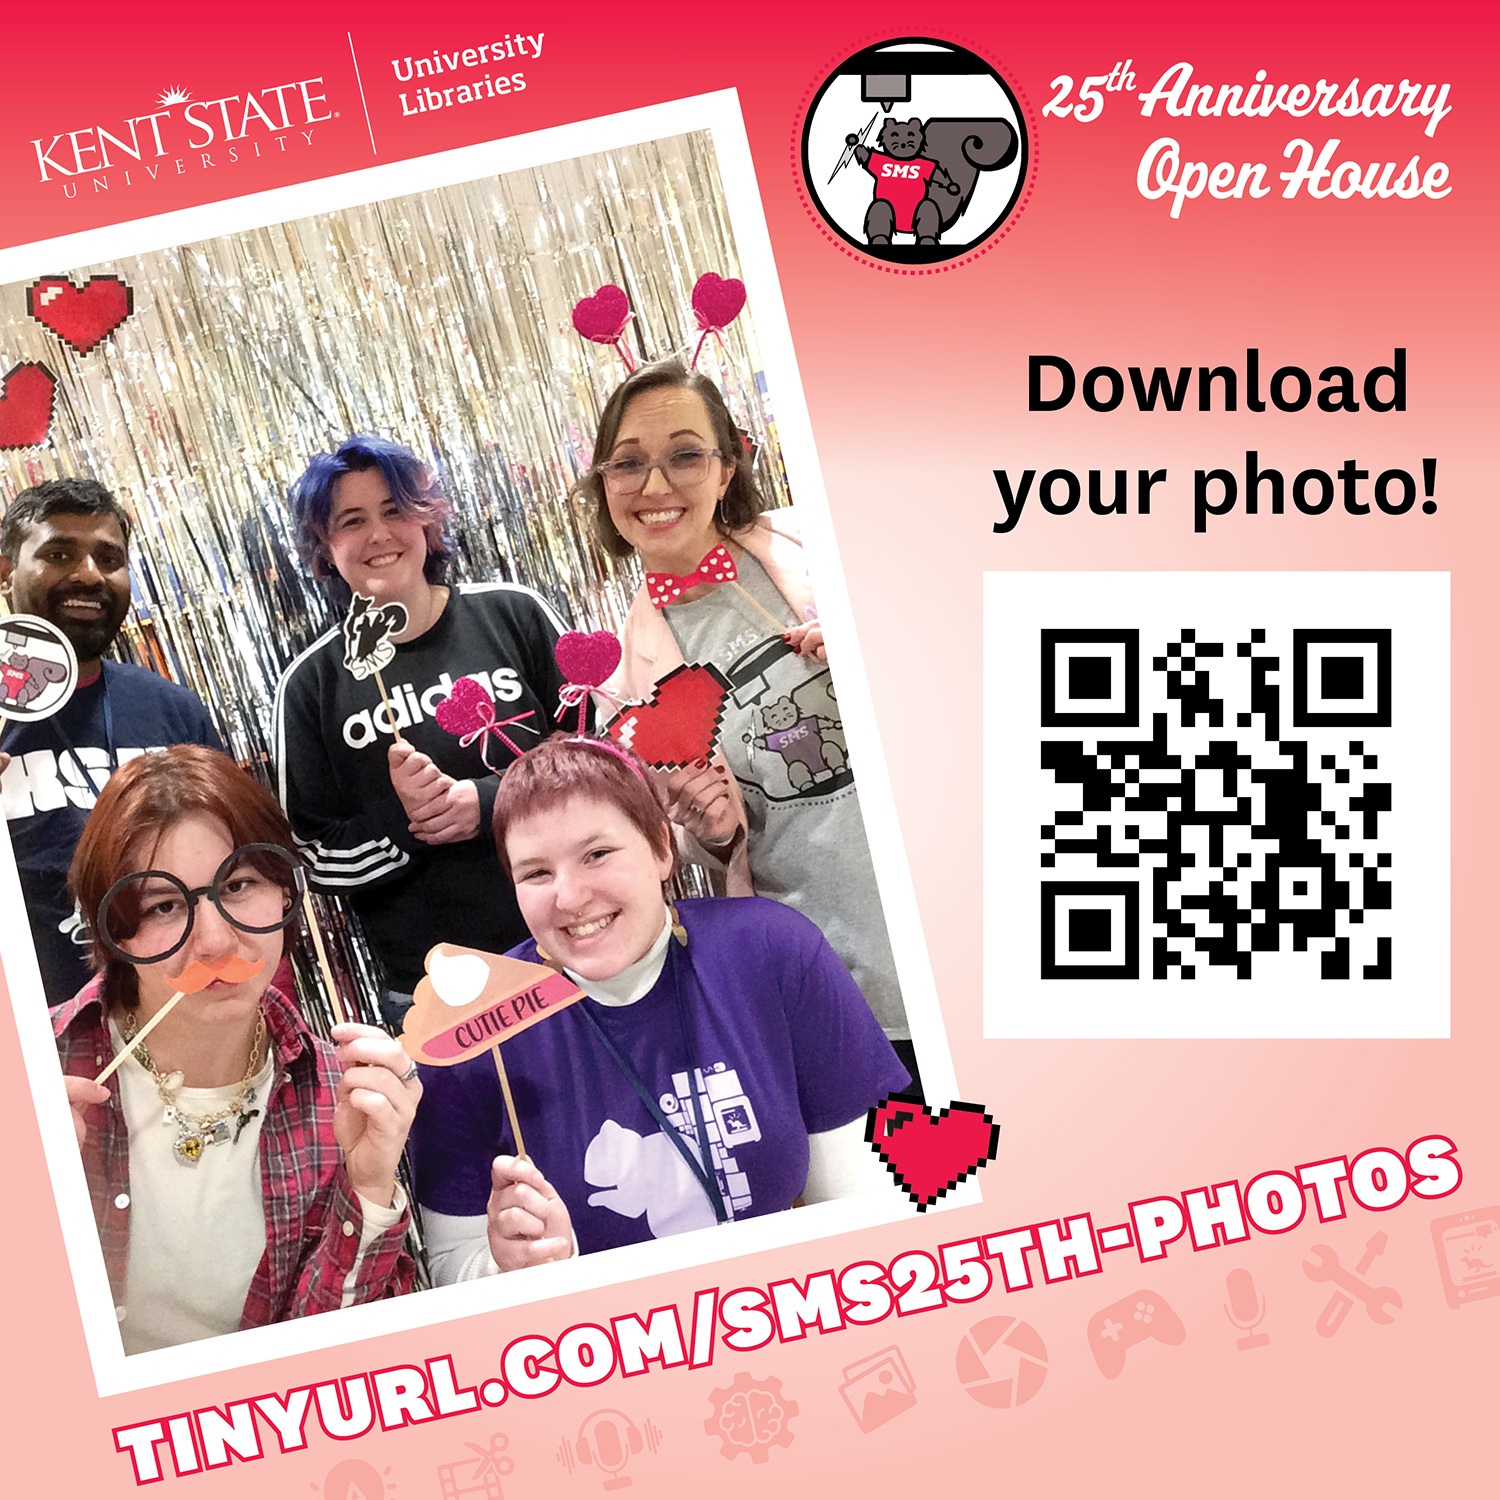 Prompt to download a photo booth picture from the SMS' 25th Anniversary Open House